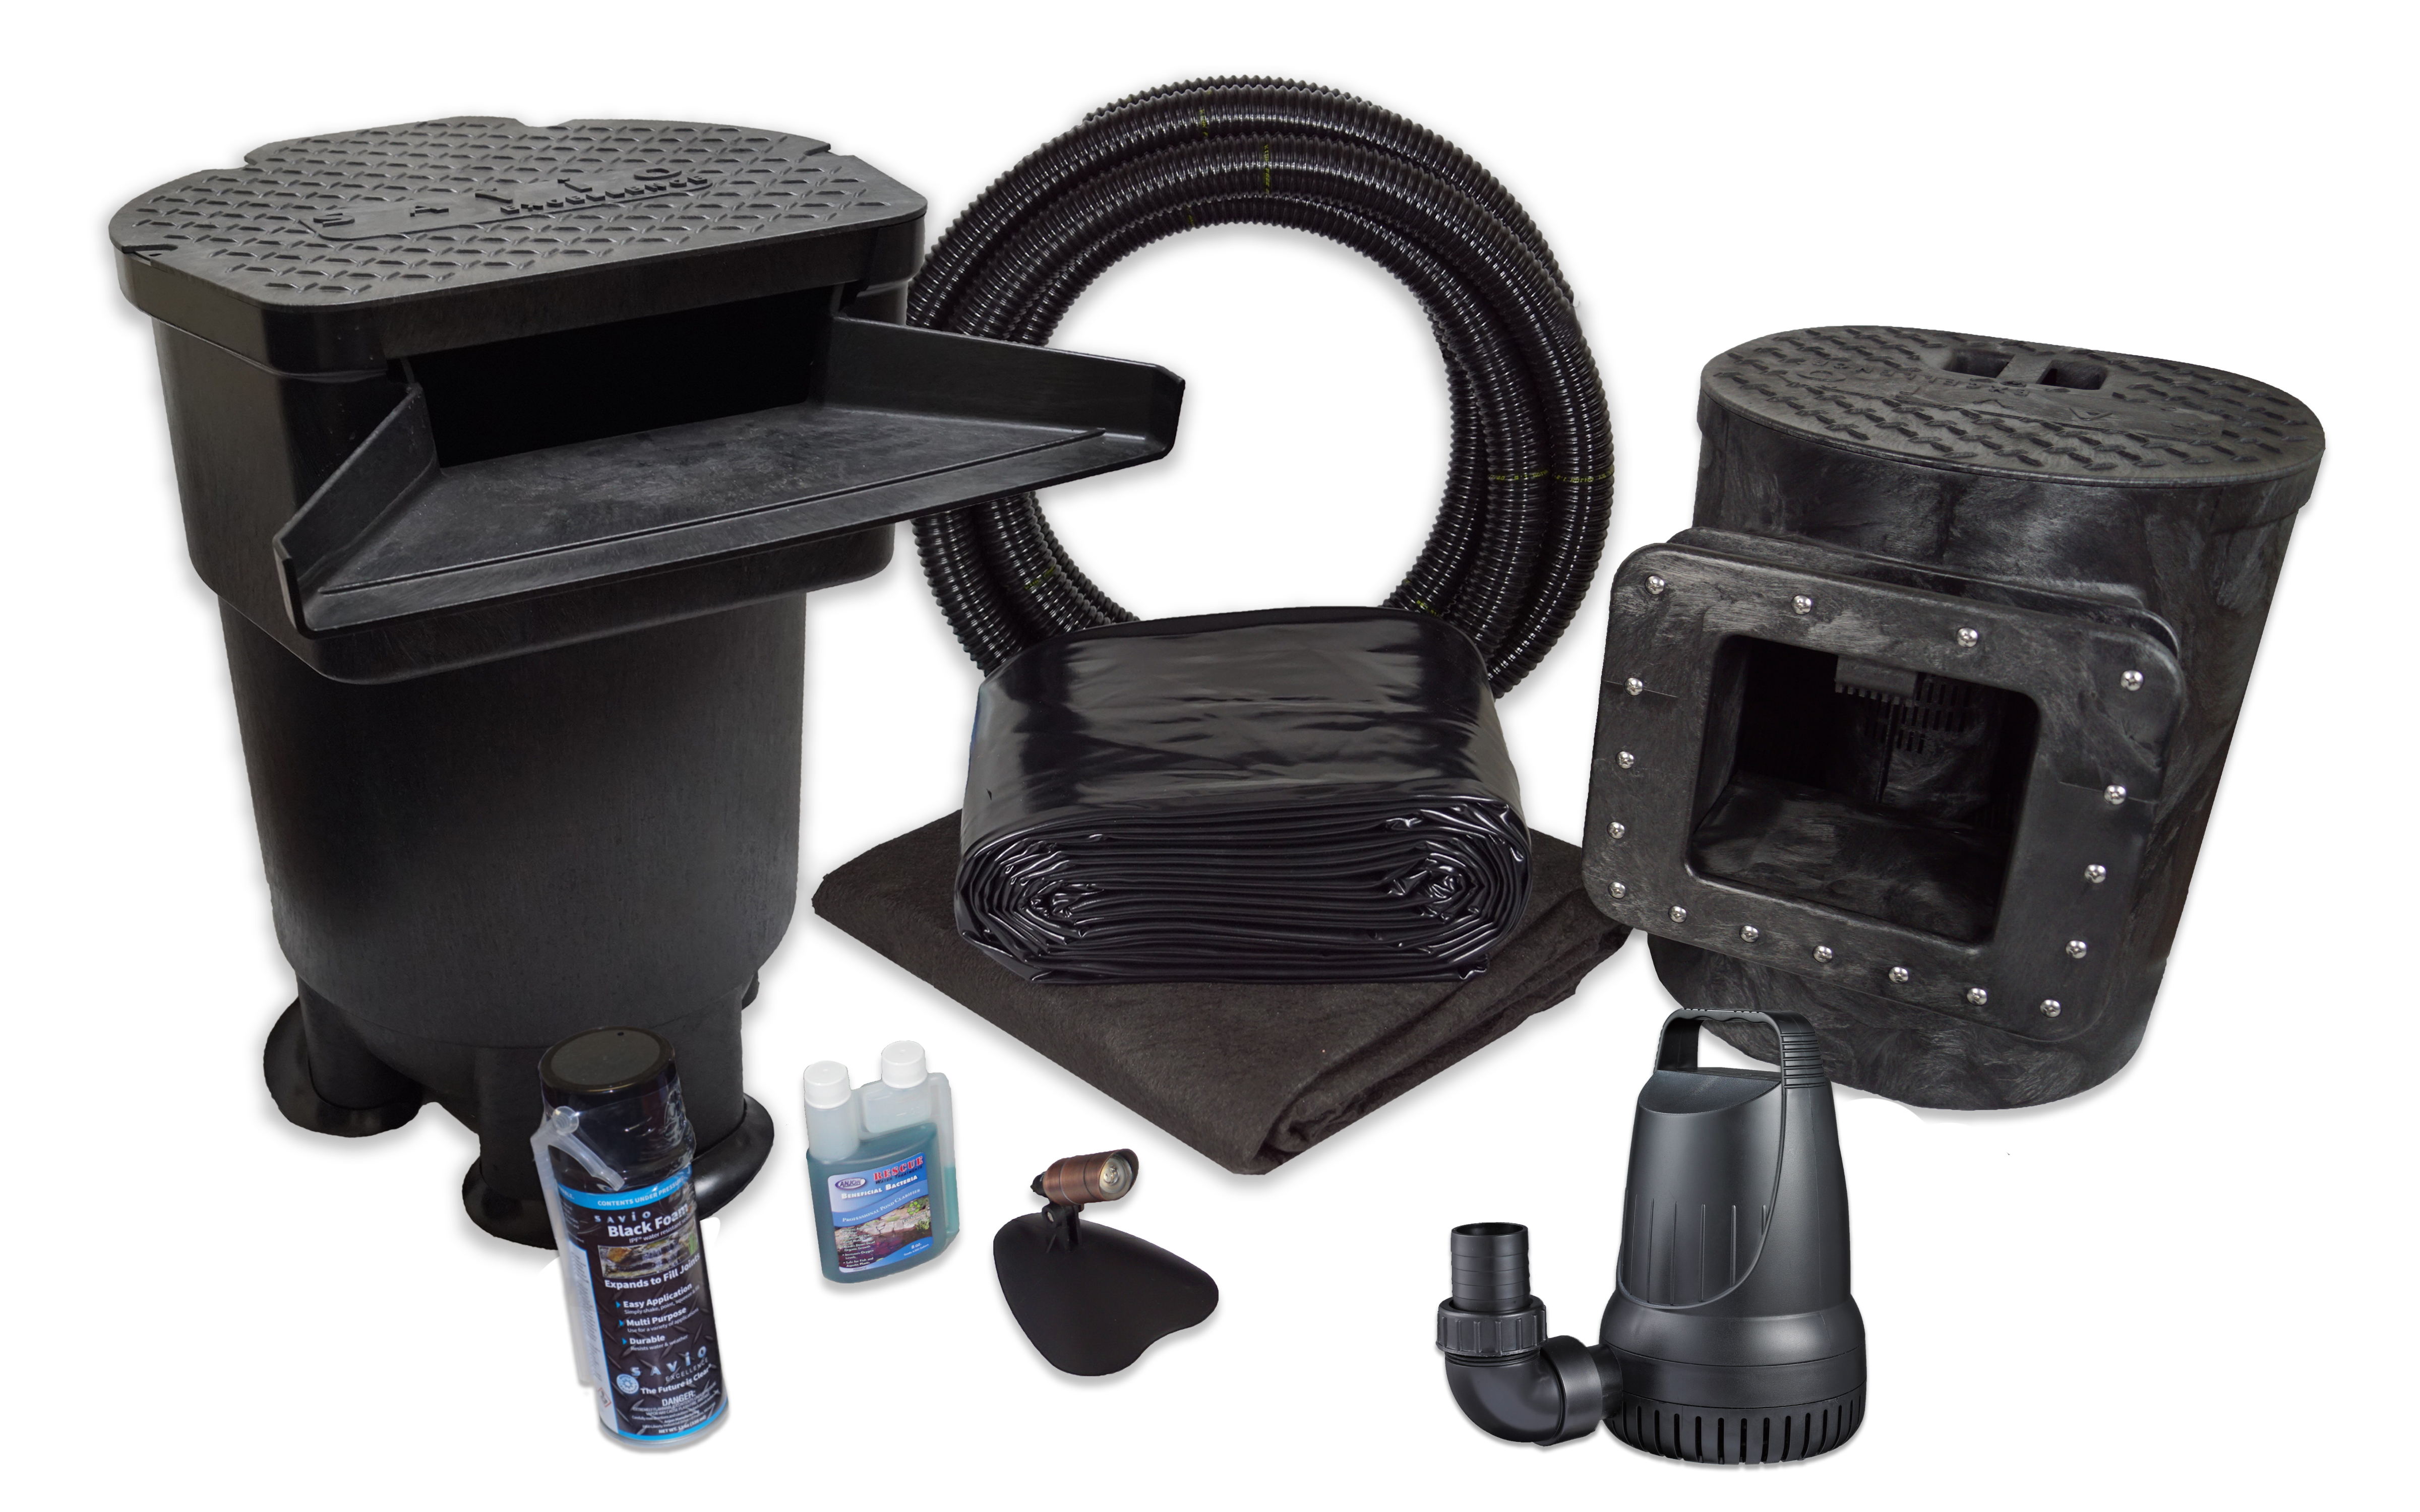 Savio Signature 4100 Complete Water Garden and Pond Kit with 20 Foot x 25 Foot PVC Liner - PVCMDS0 - image 1 of 7